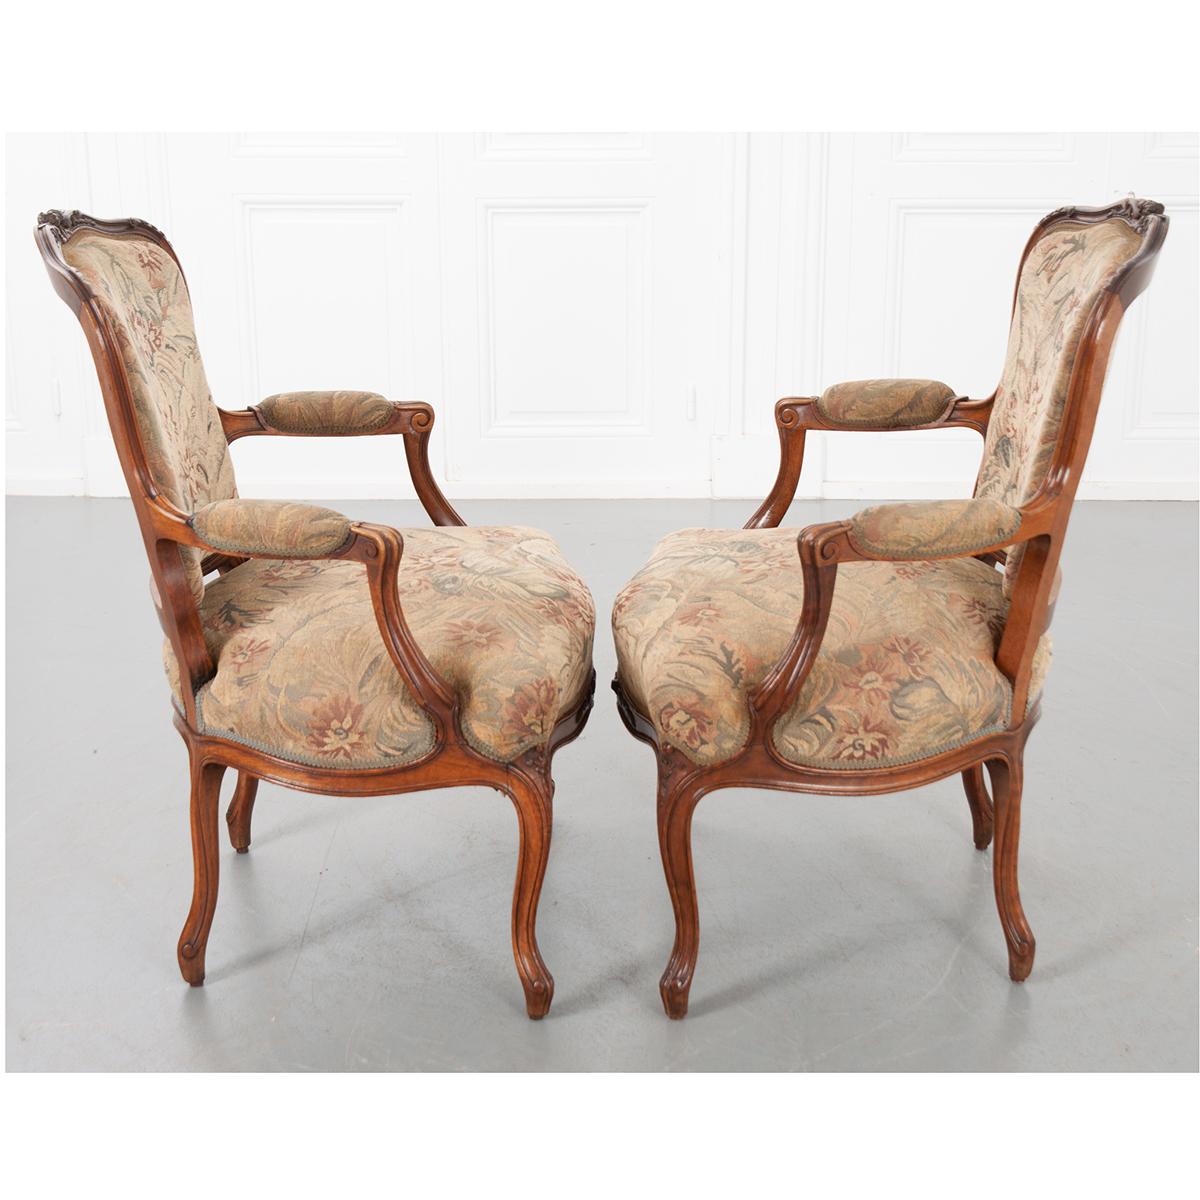 A lovely pair of French Louis XVI style carved walnut fauteuils are upholstered in a floral fabric with muted rose and green tones. The armchairs are beautifully carved and very comfortable. The seat height is 18”. C. 1900.